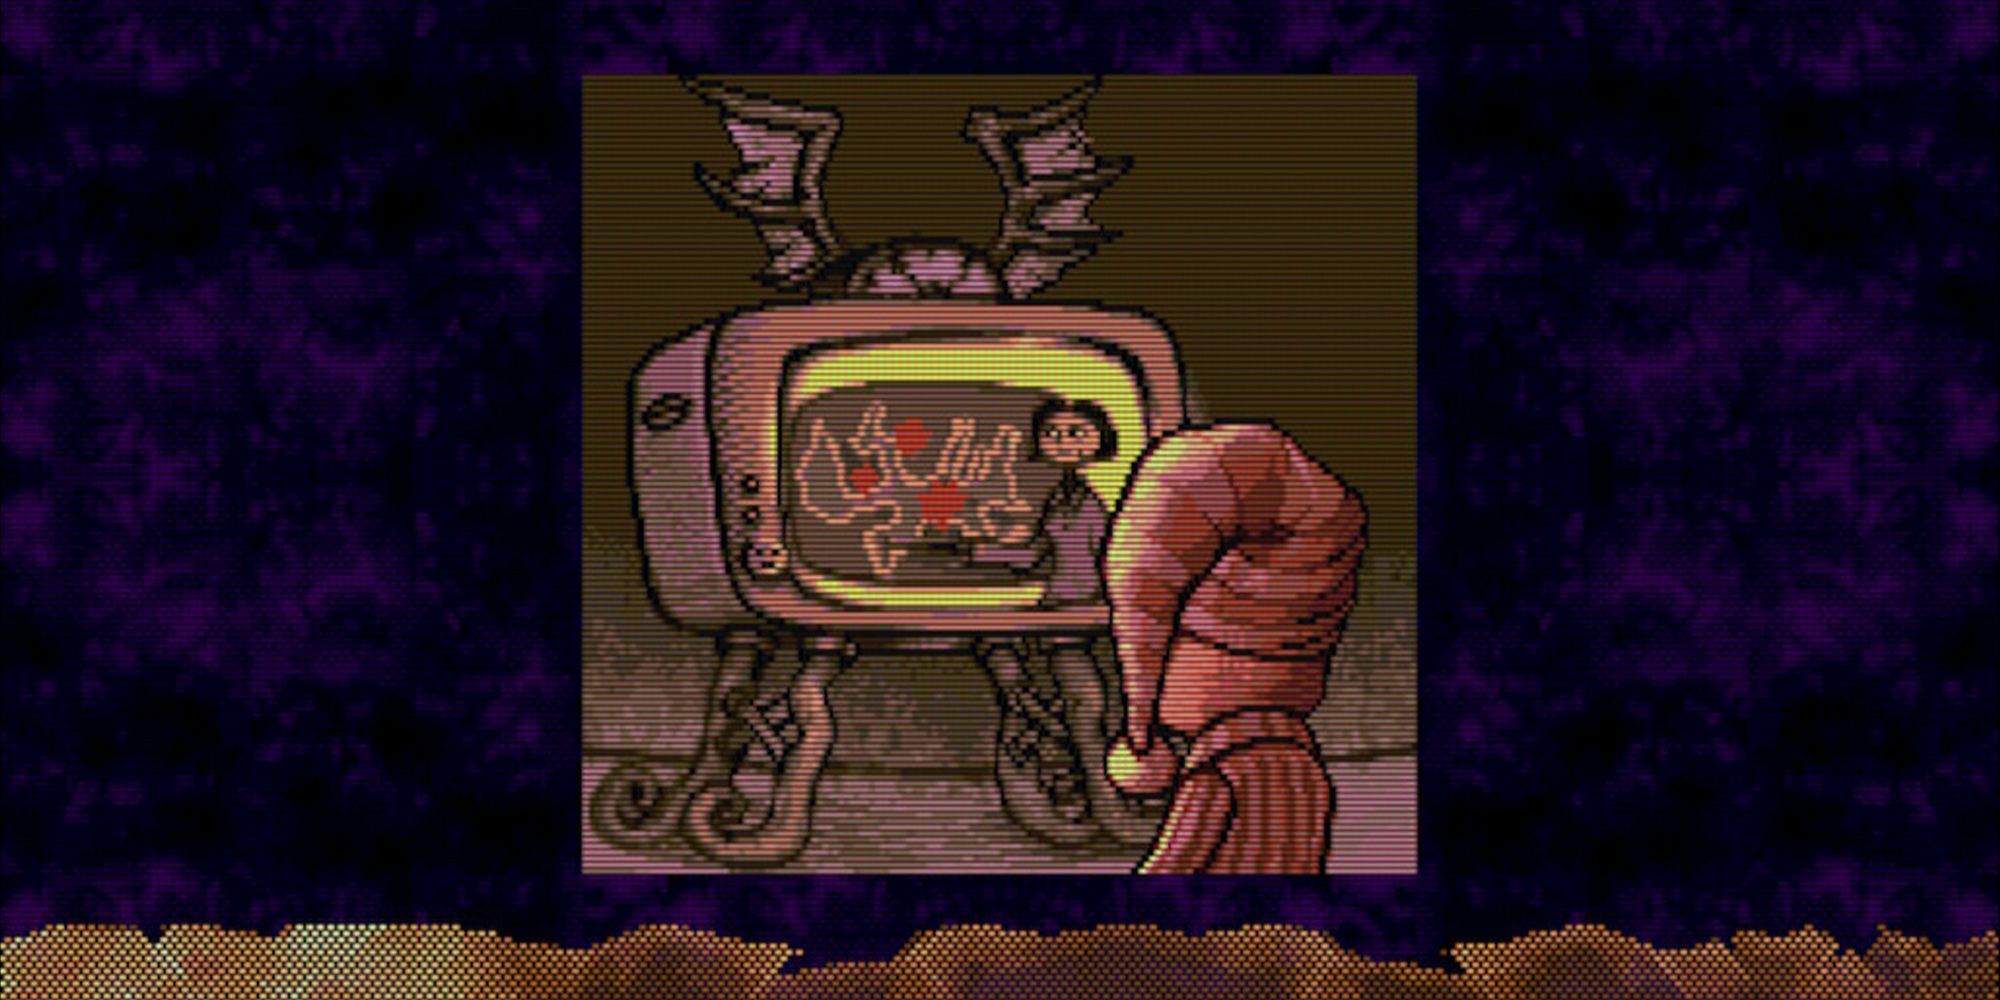 A wolf child watches the devastating news of a red-bonneted serial killer in BB Hood's ending from Vampire Savior.